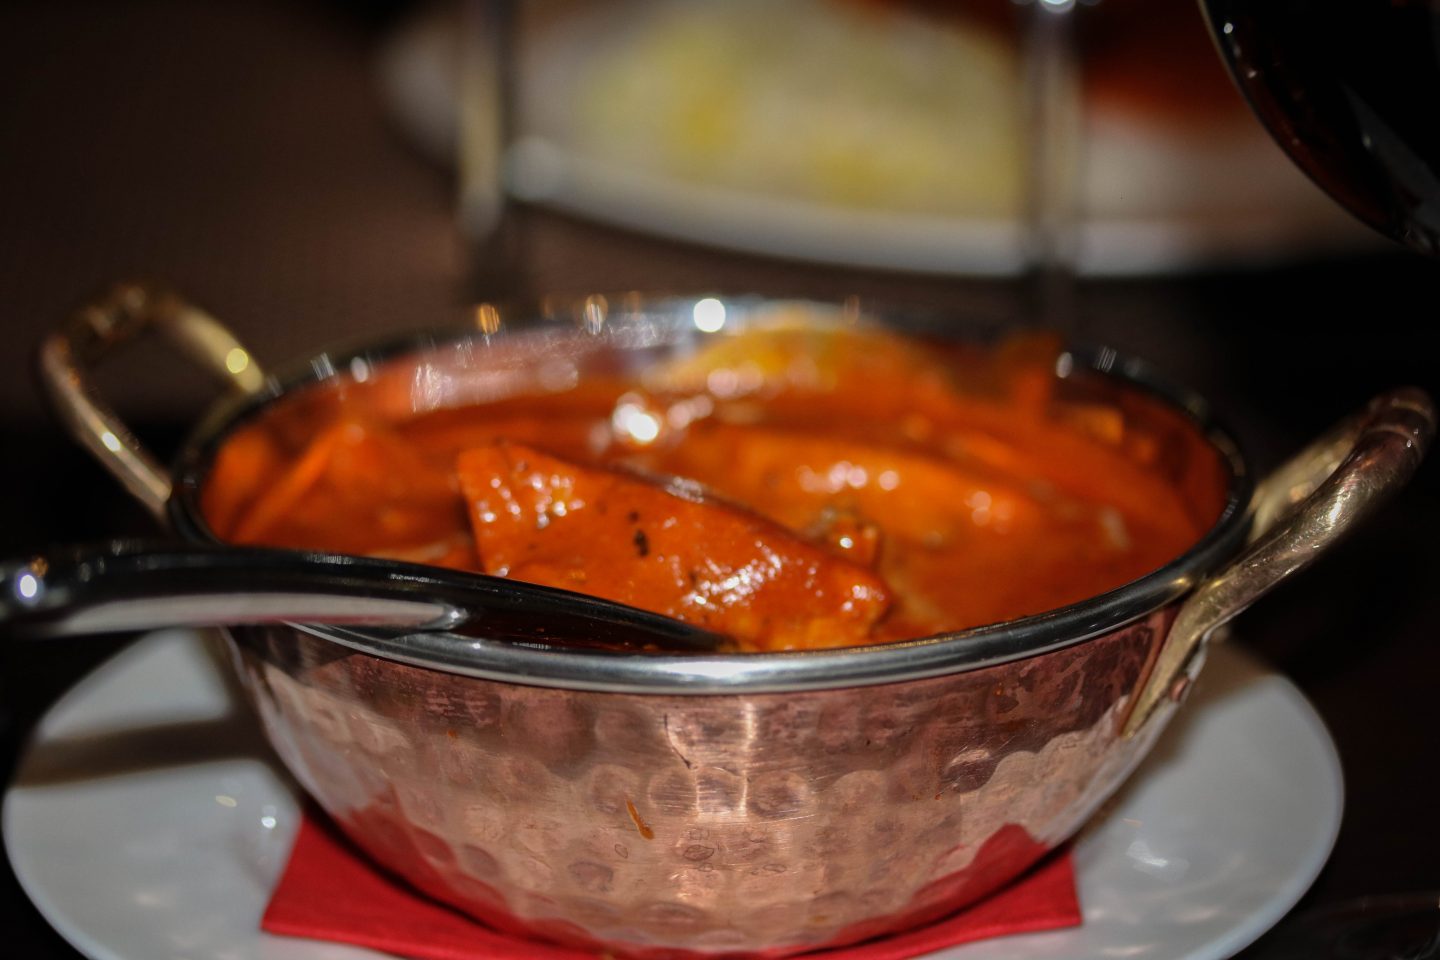 The LaLiT Hotel London - Baluchi Butter Chicken - Lifestyle Enthusiast Blog Review